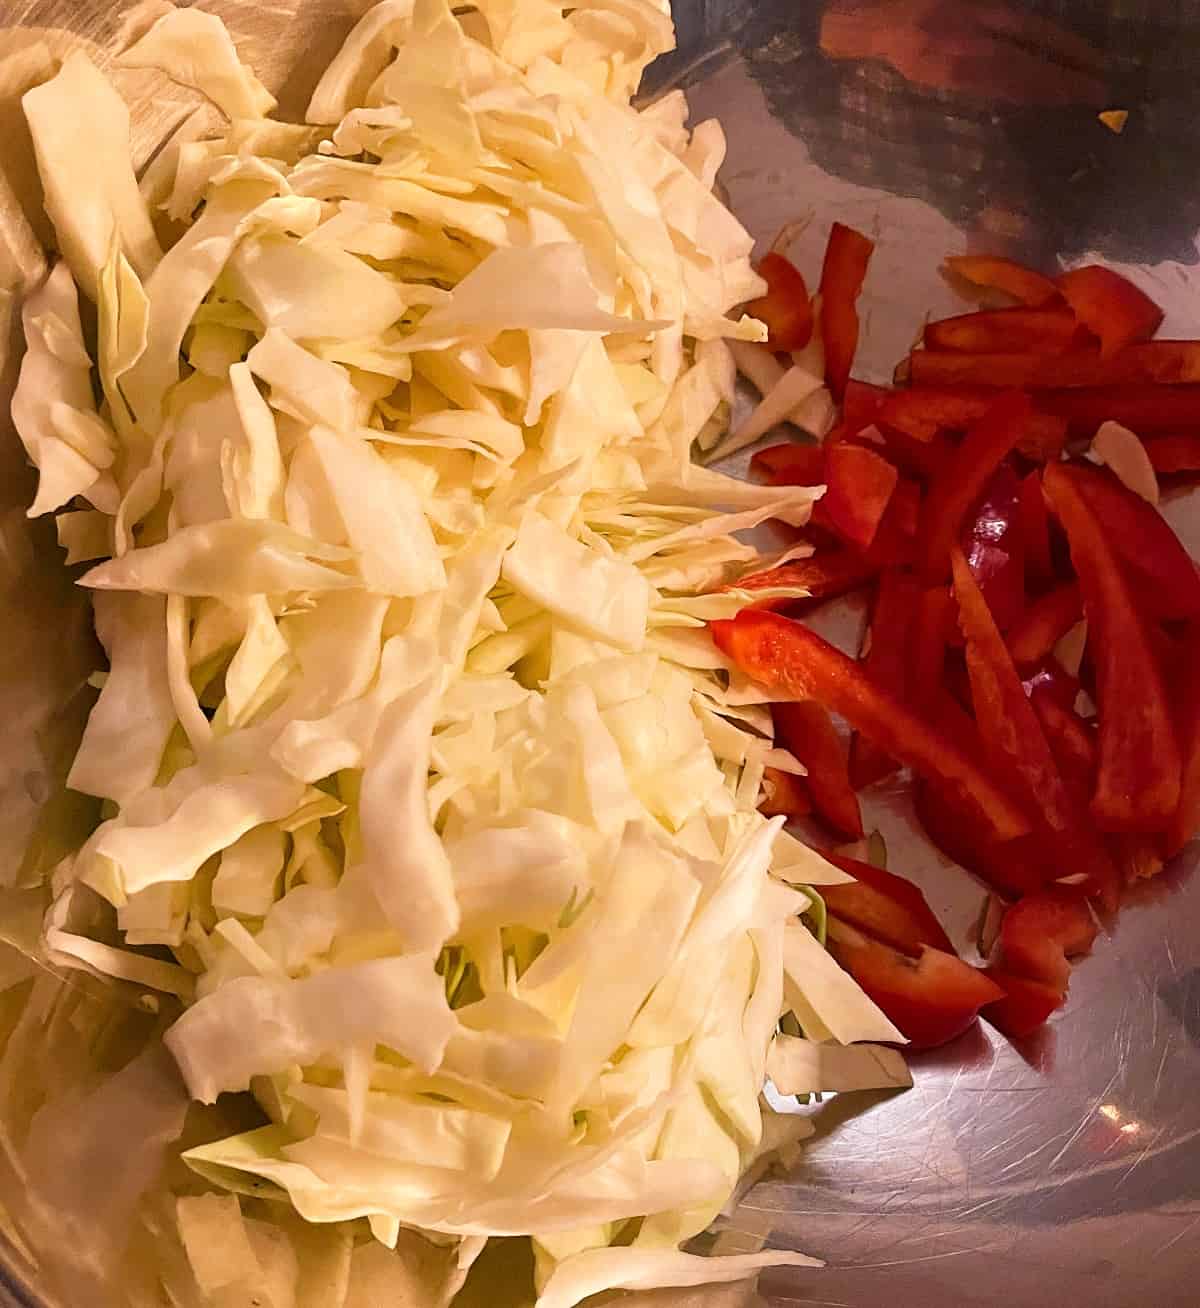 chopped cabbage and red bell peppers next to each other in a silver bowl.